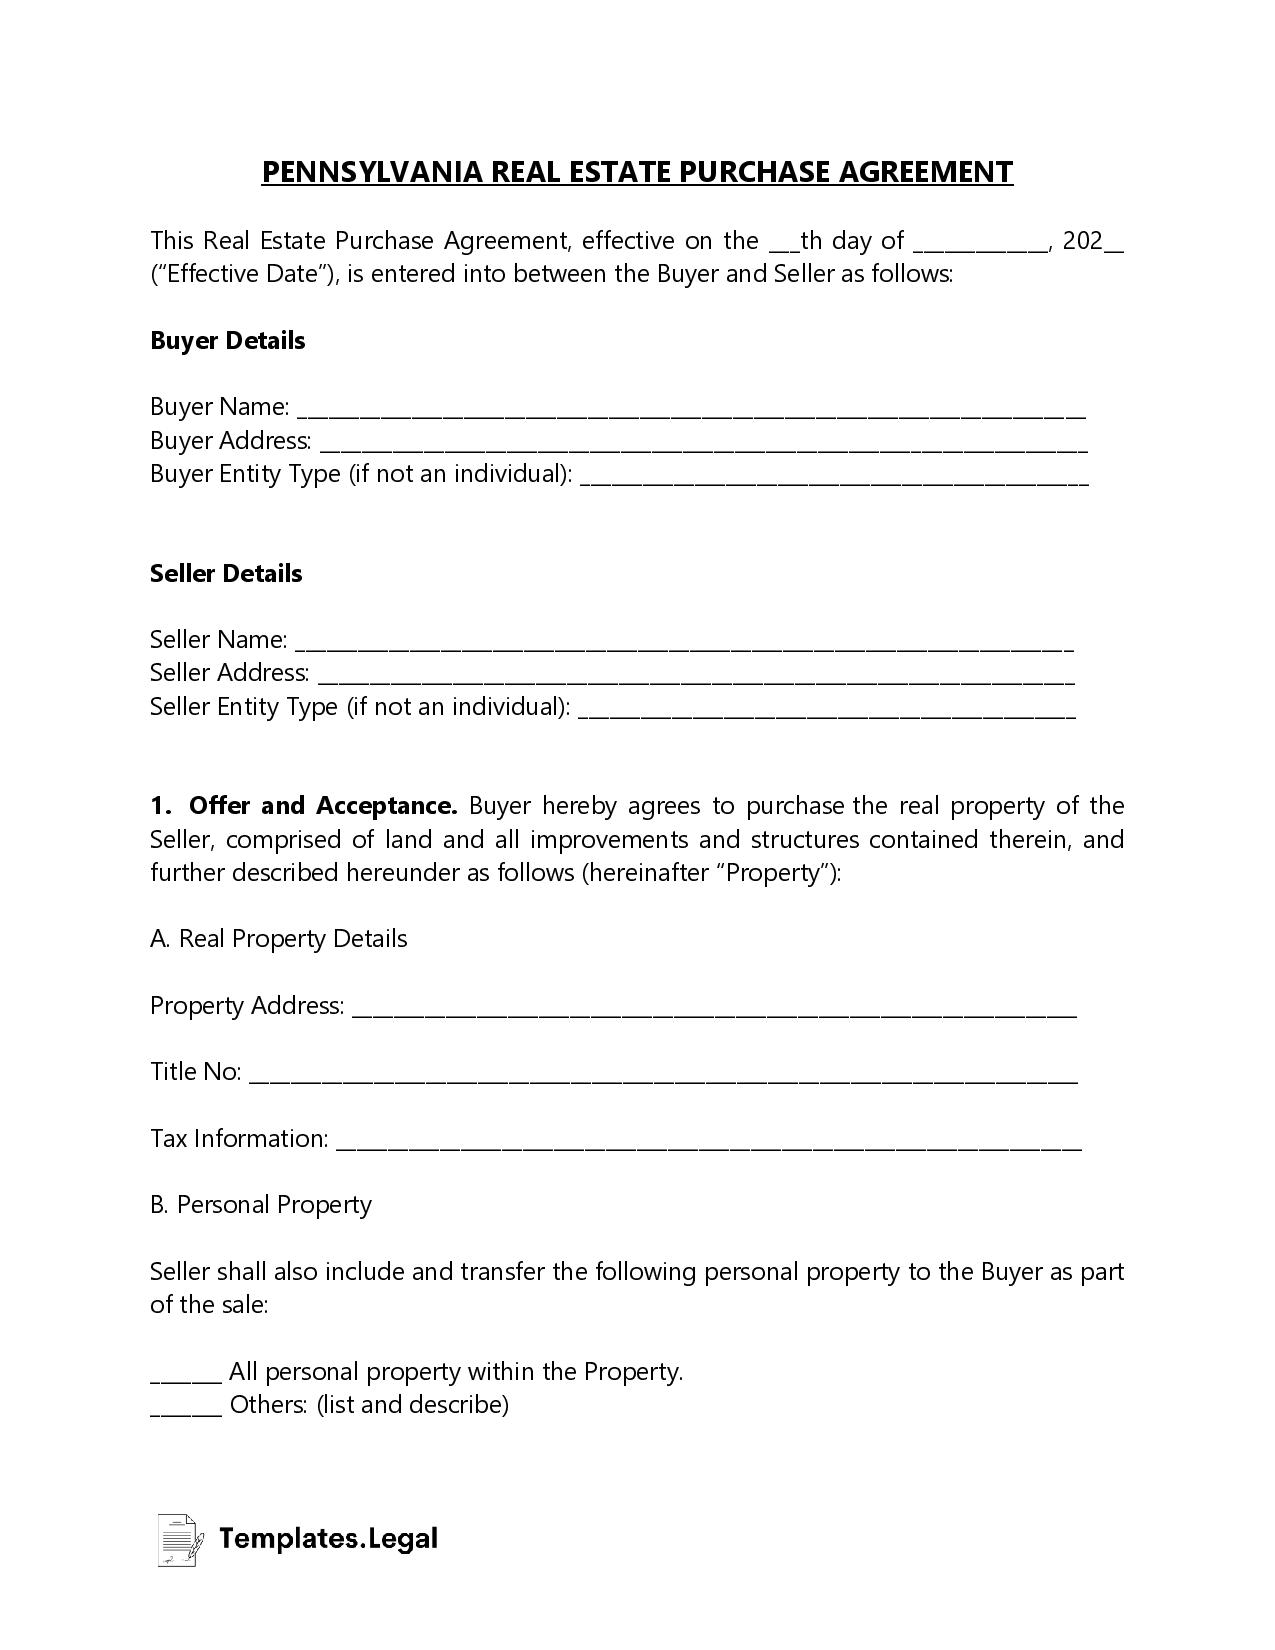 Pennsylvania Real Estate Purchase Agreement - Templates.Legal